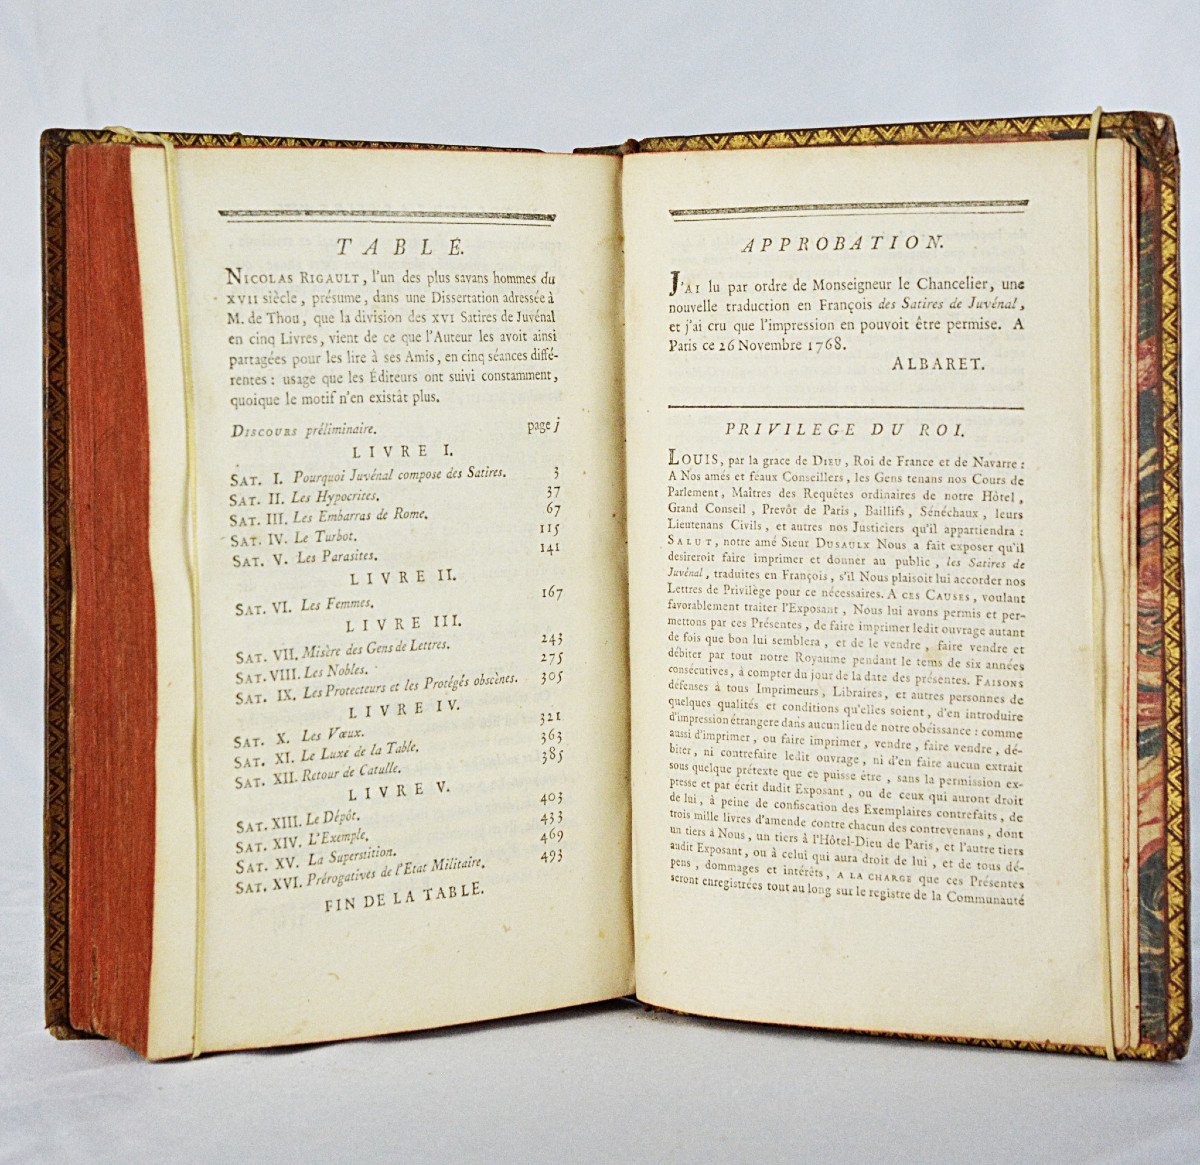 Satires Of Juvenal In Latin And French, Translated By Dusaulx In 1770